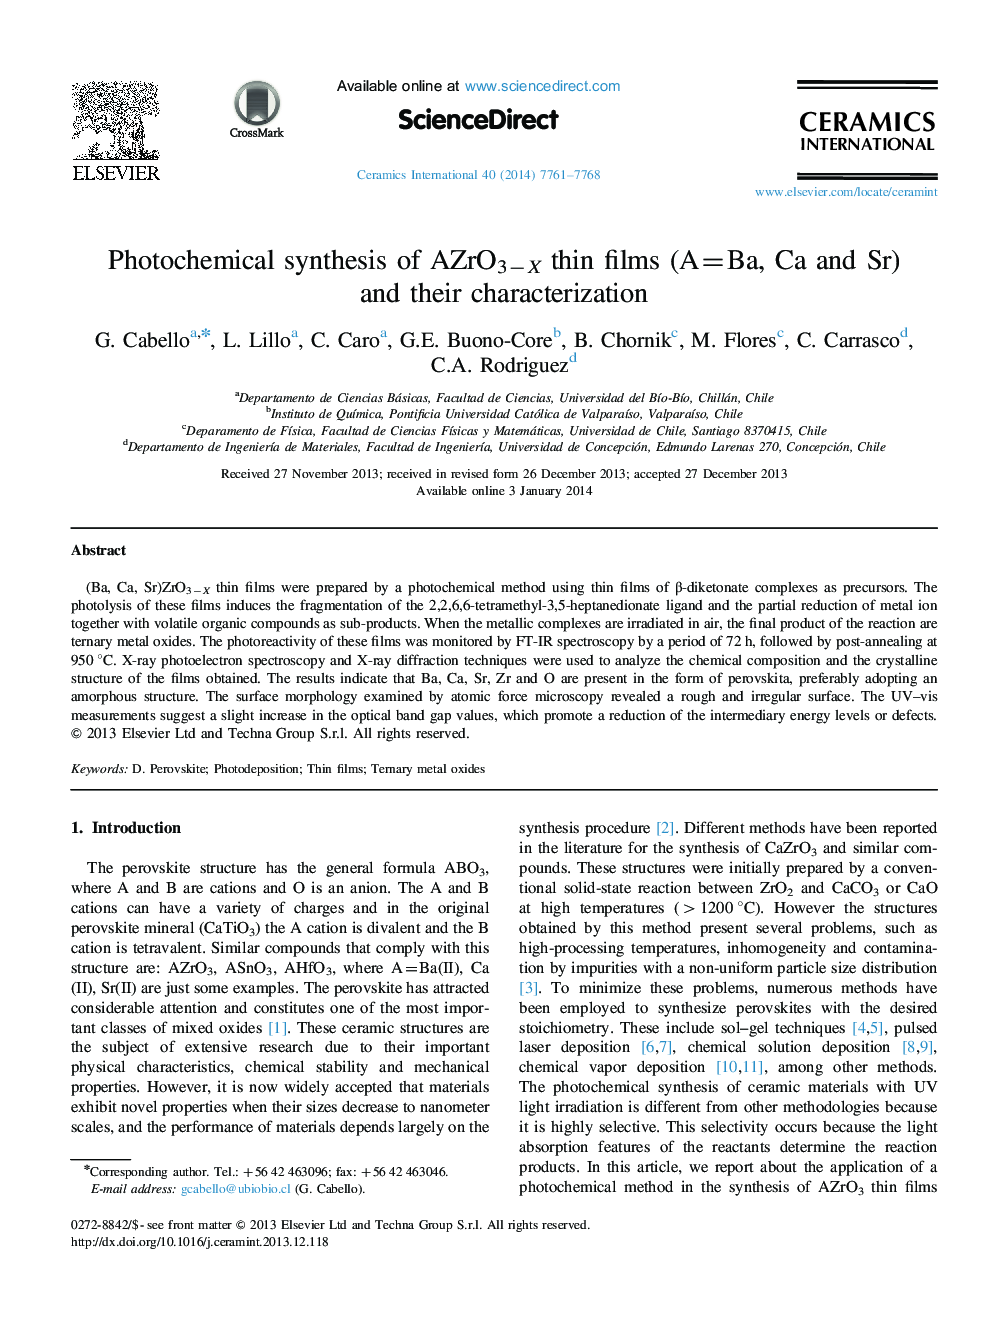 Photochemical synthesis of AZrO3−X thin films (A=Ba, Ca and Sr) and their characterization